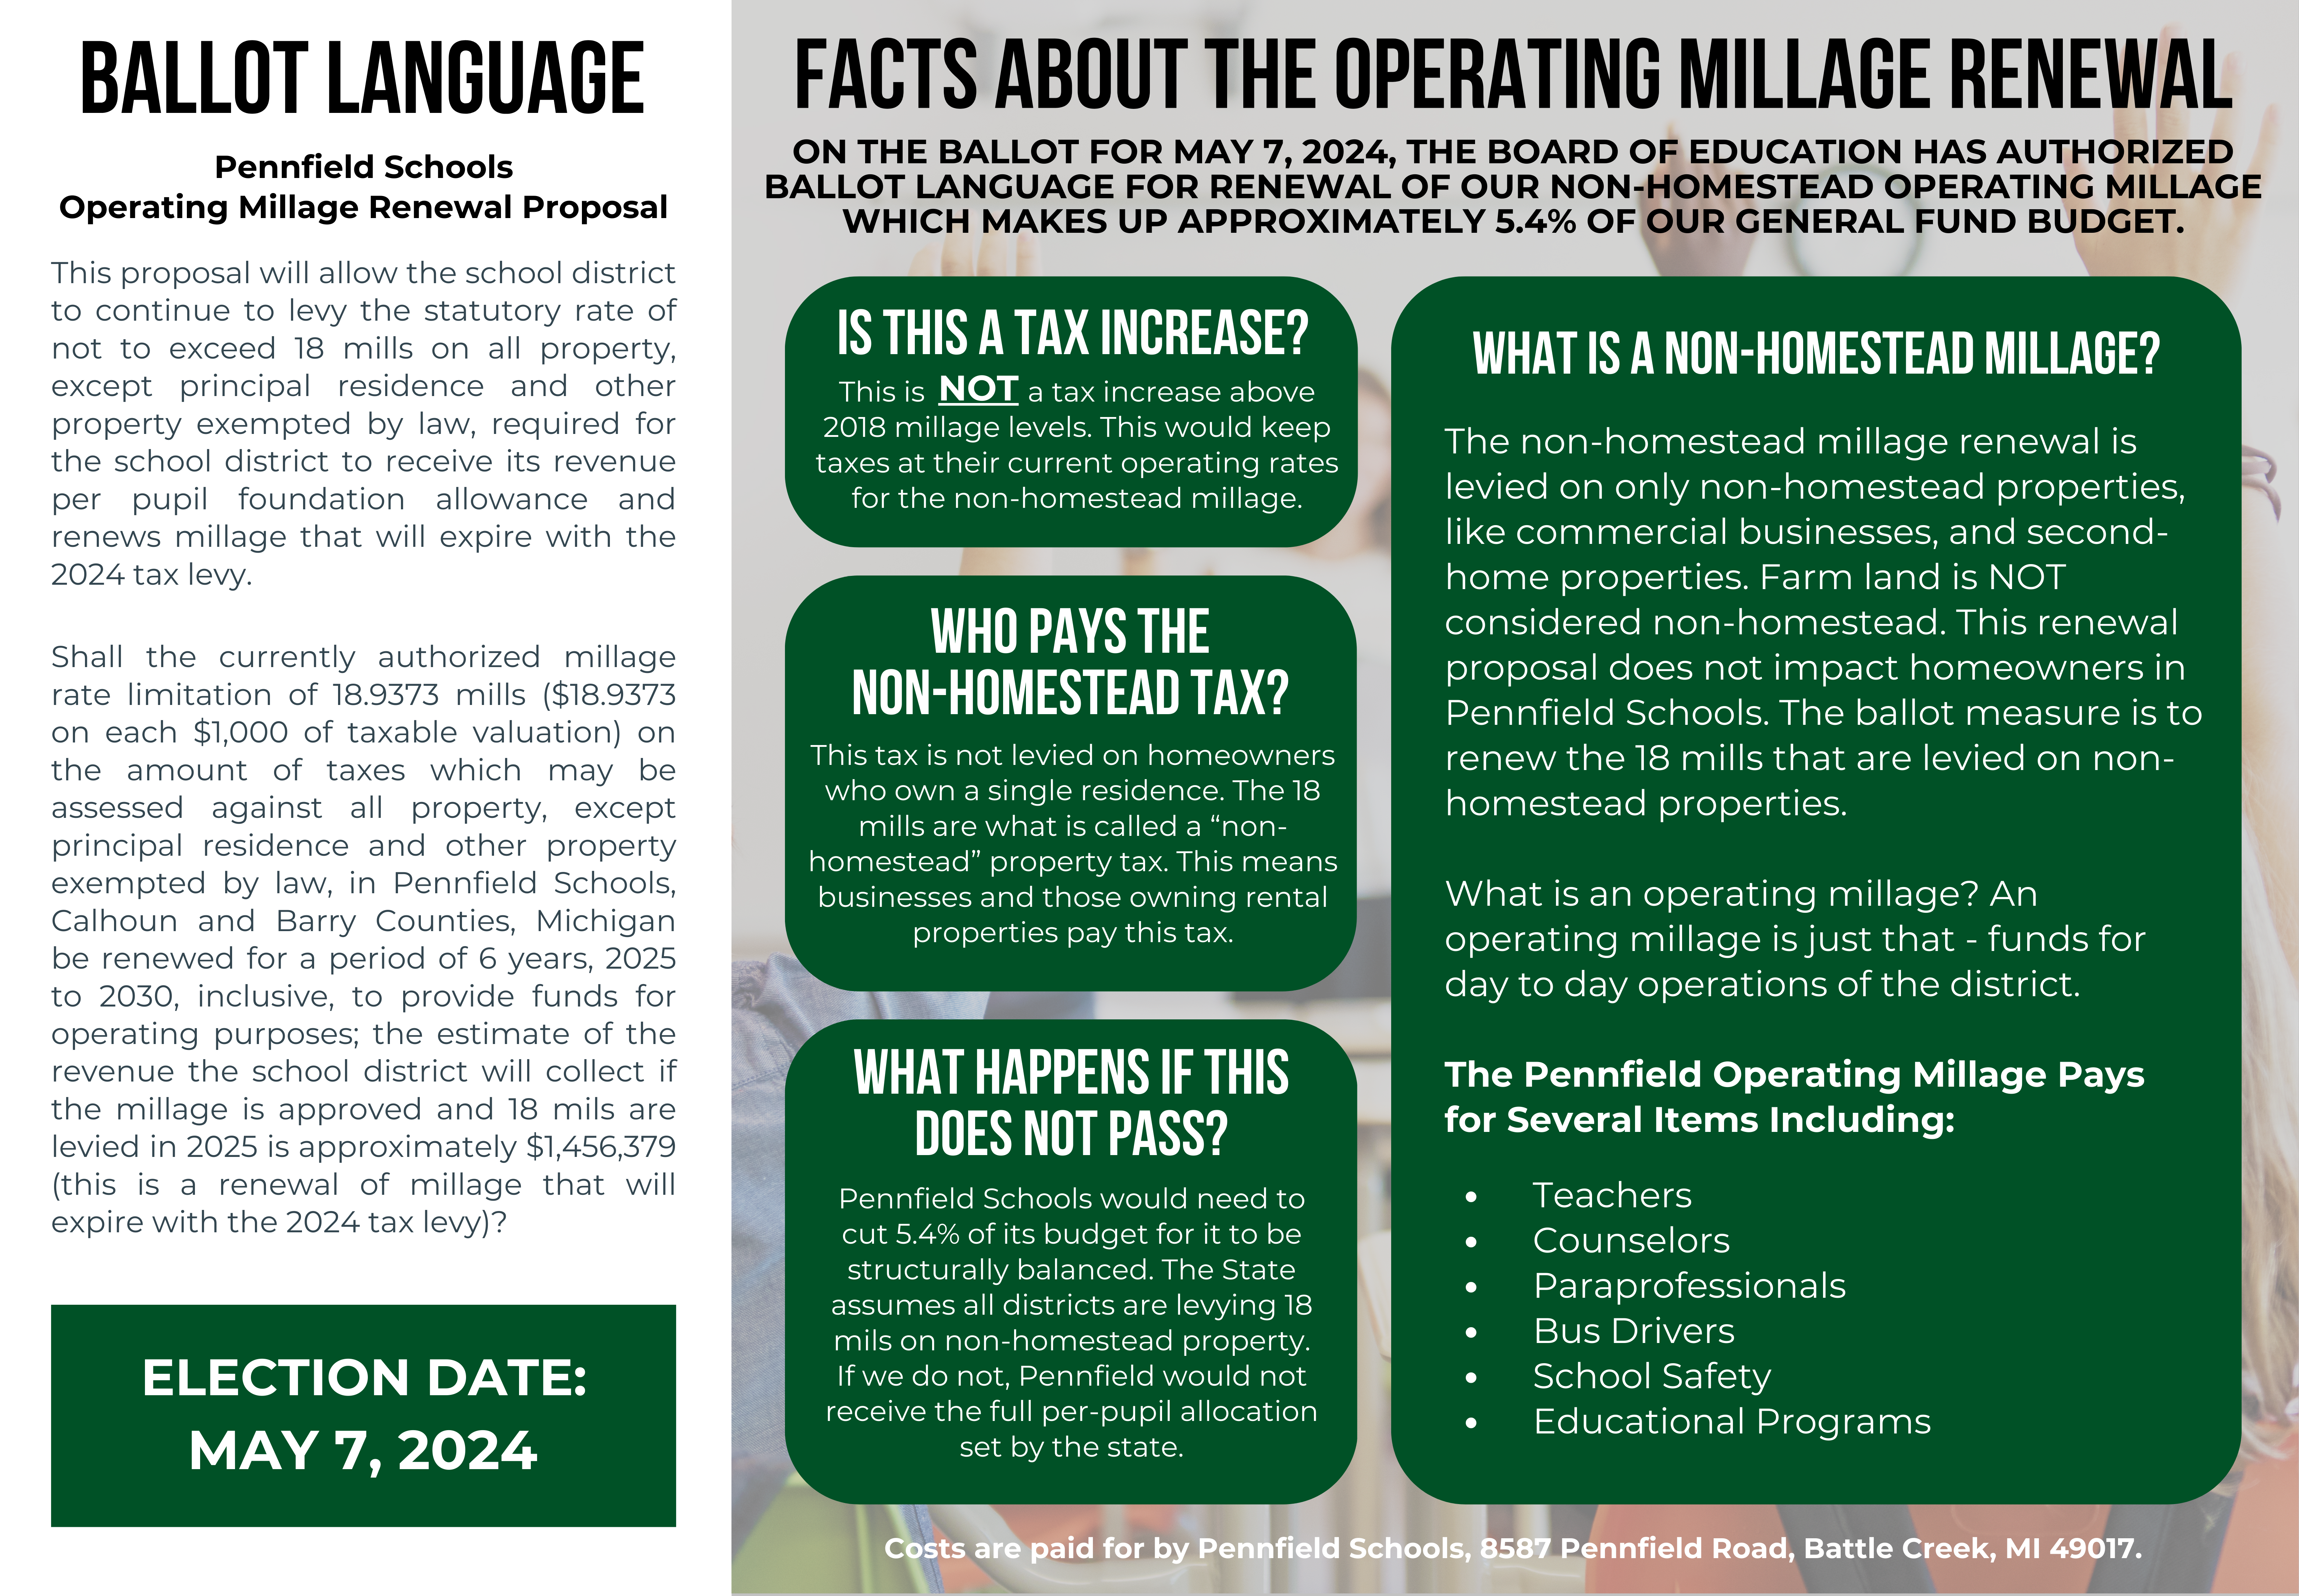 Facts About the Operating Millage Renewal